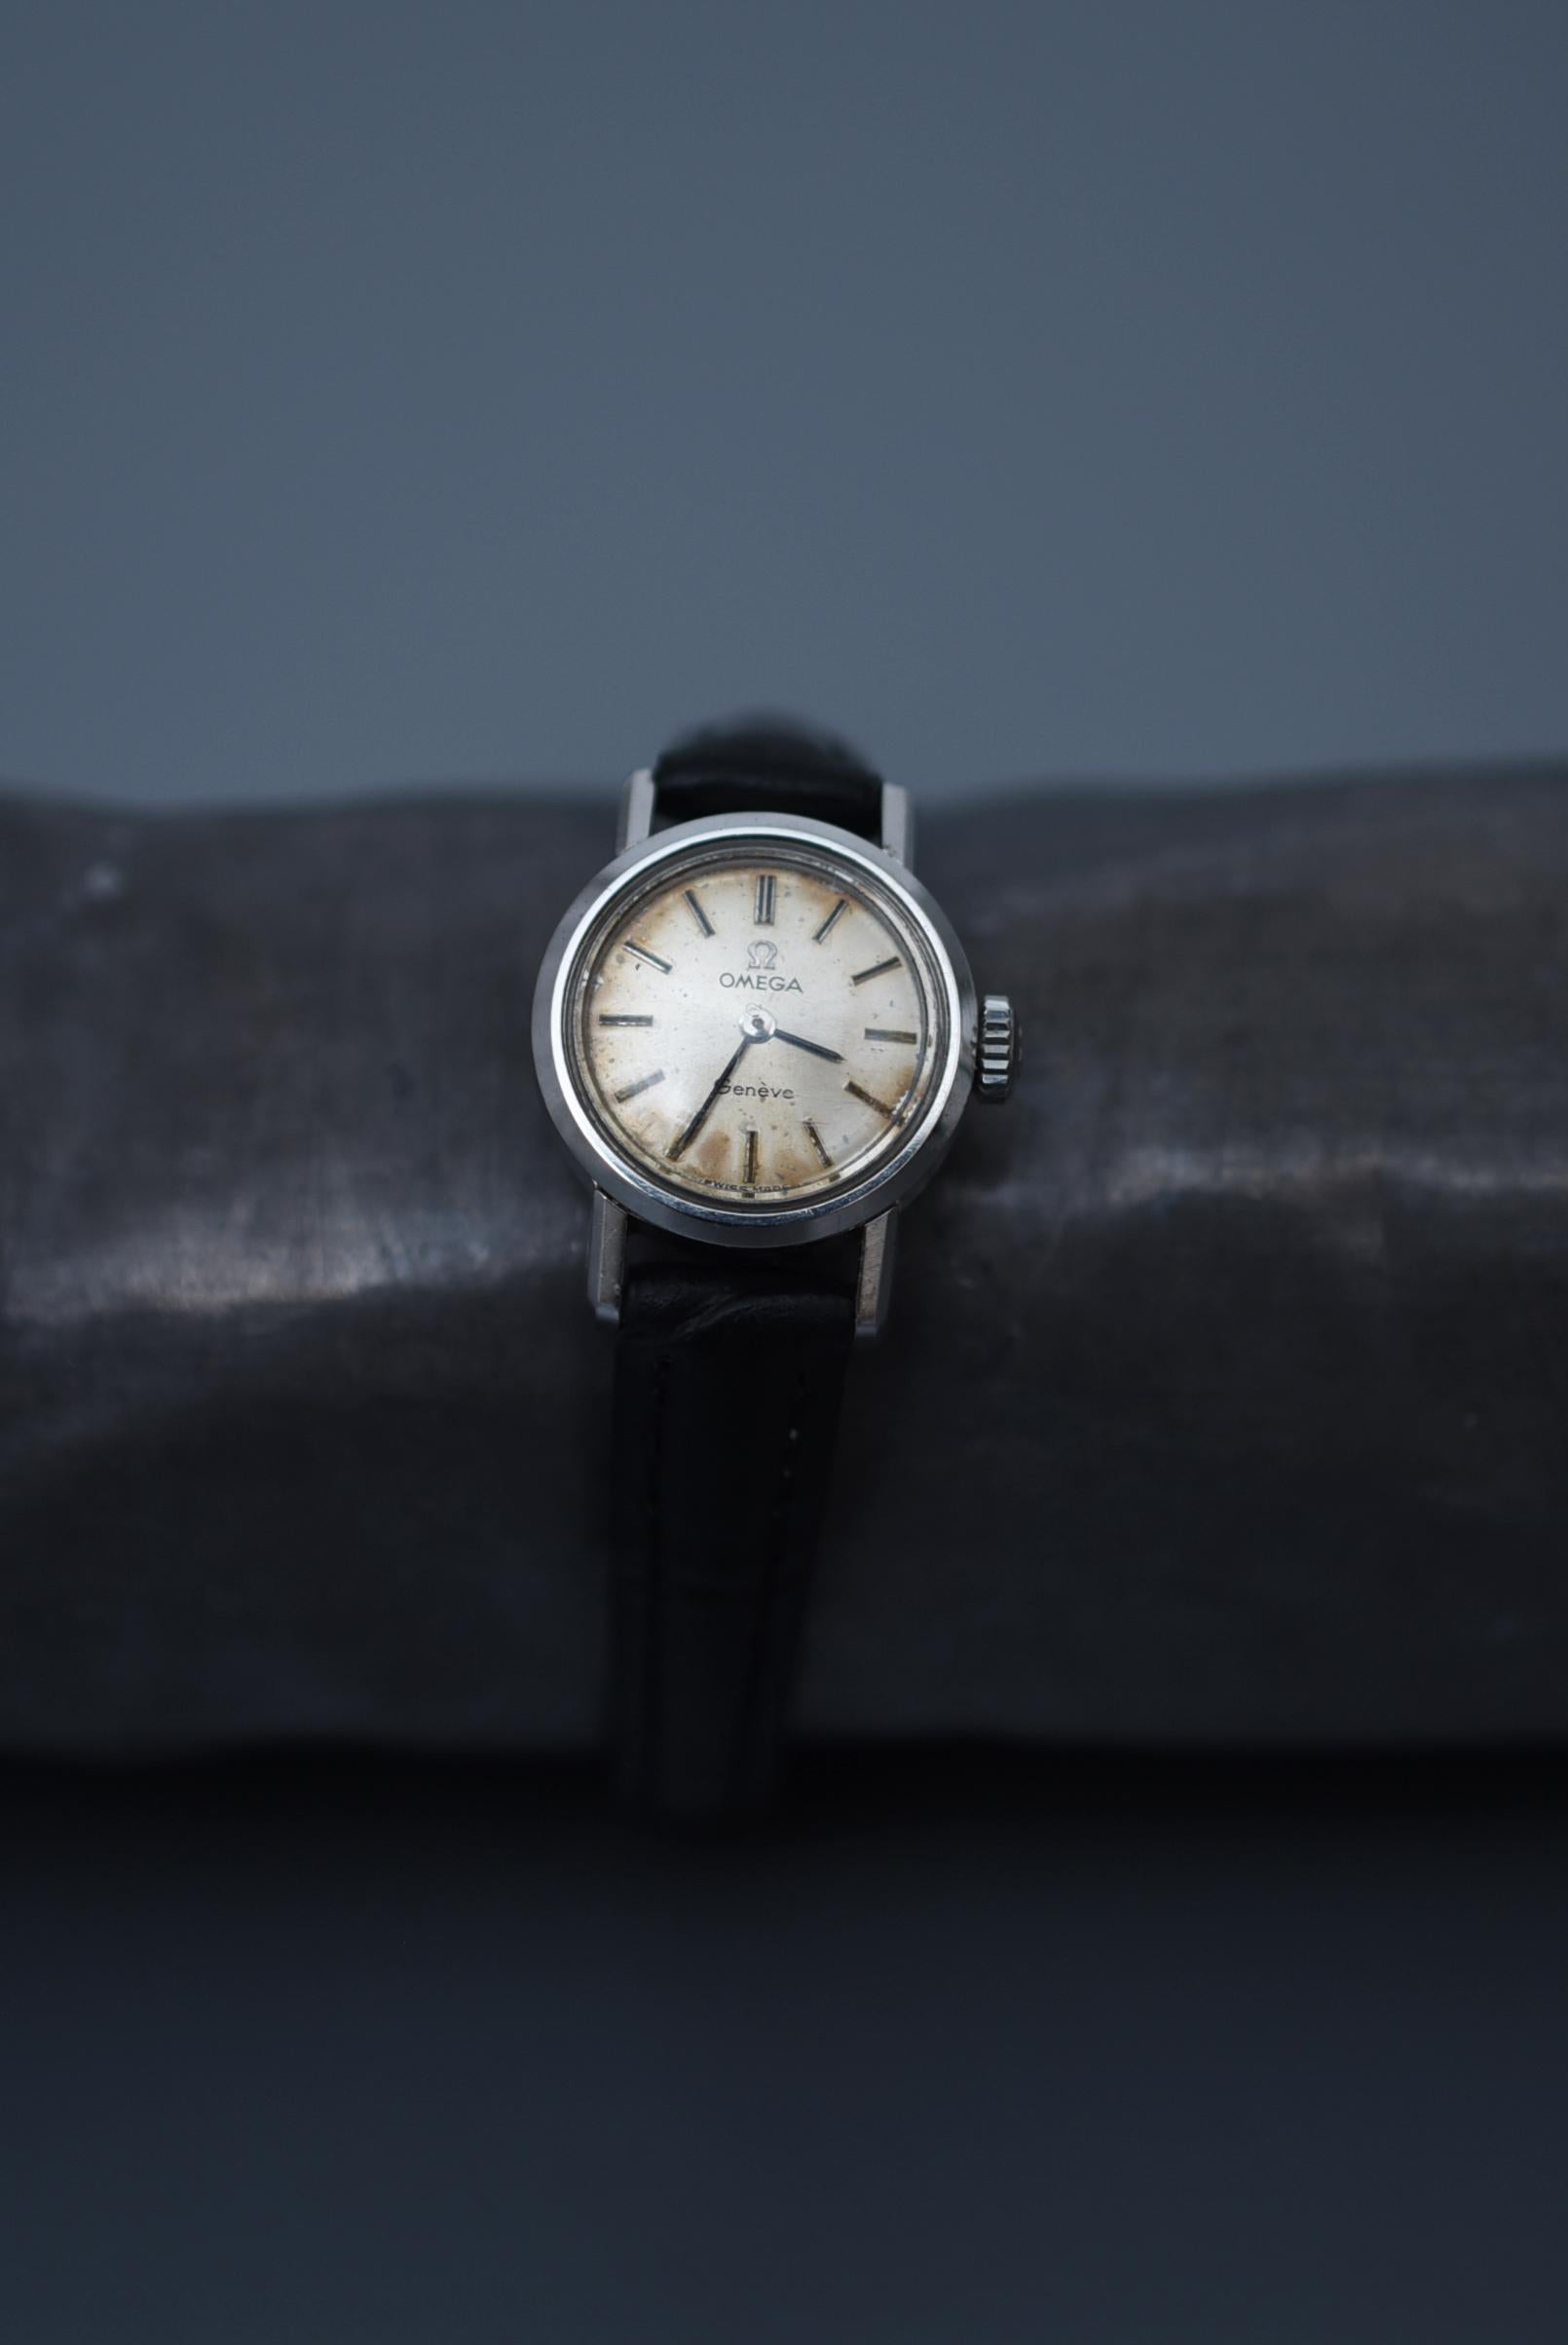 OMEGA Geneve 1970s Vintage watch ladies

size : case 1.8cm
arm circumference : 14cm between 18cm

movement : Hand-wound 